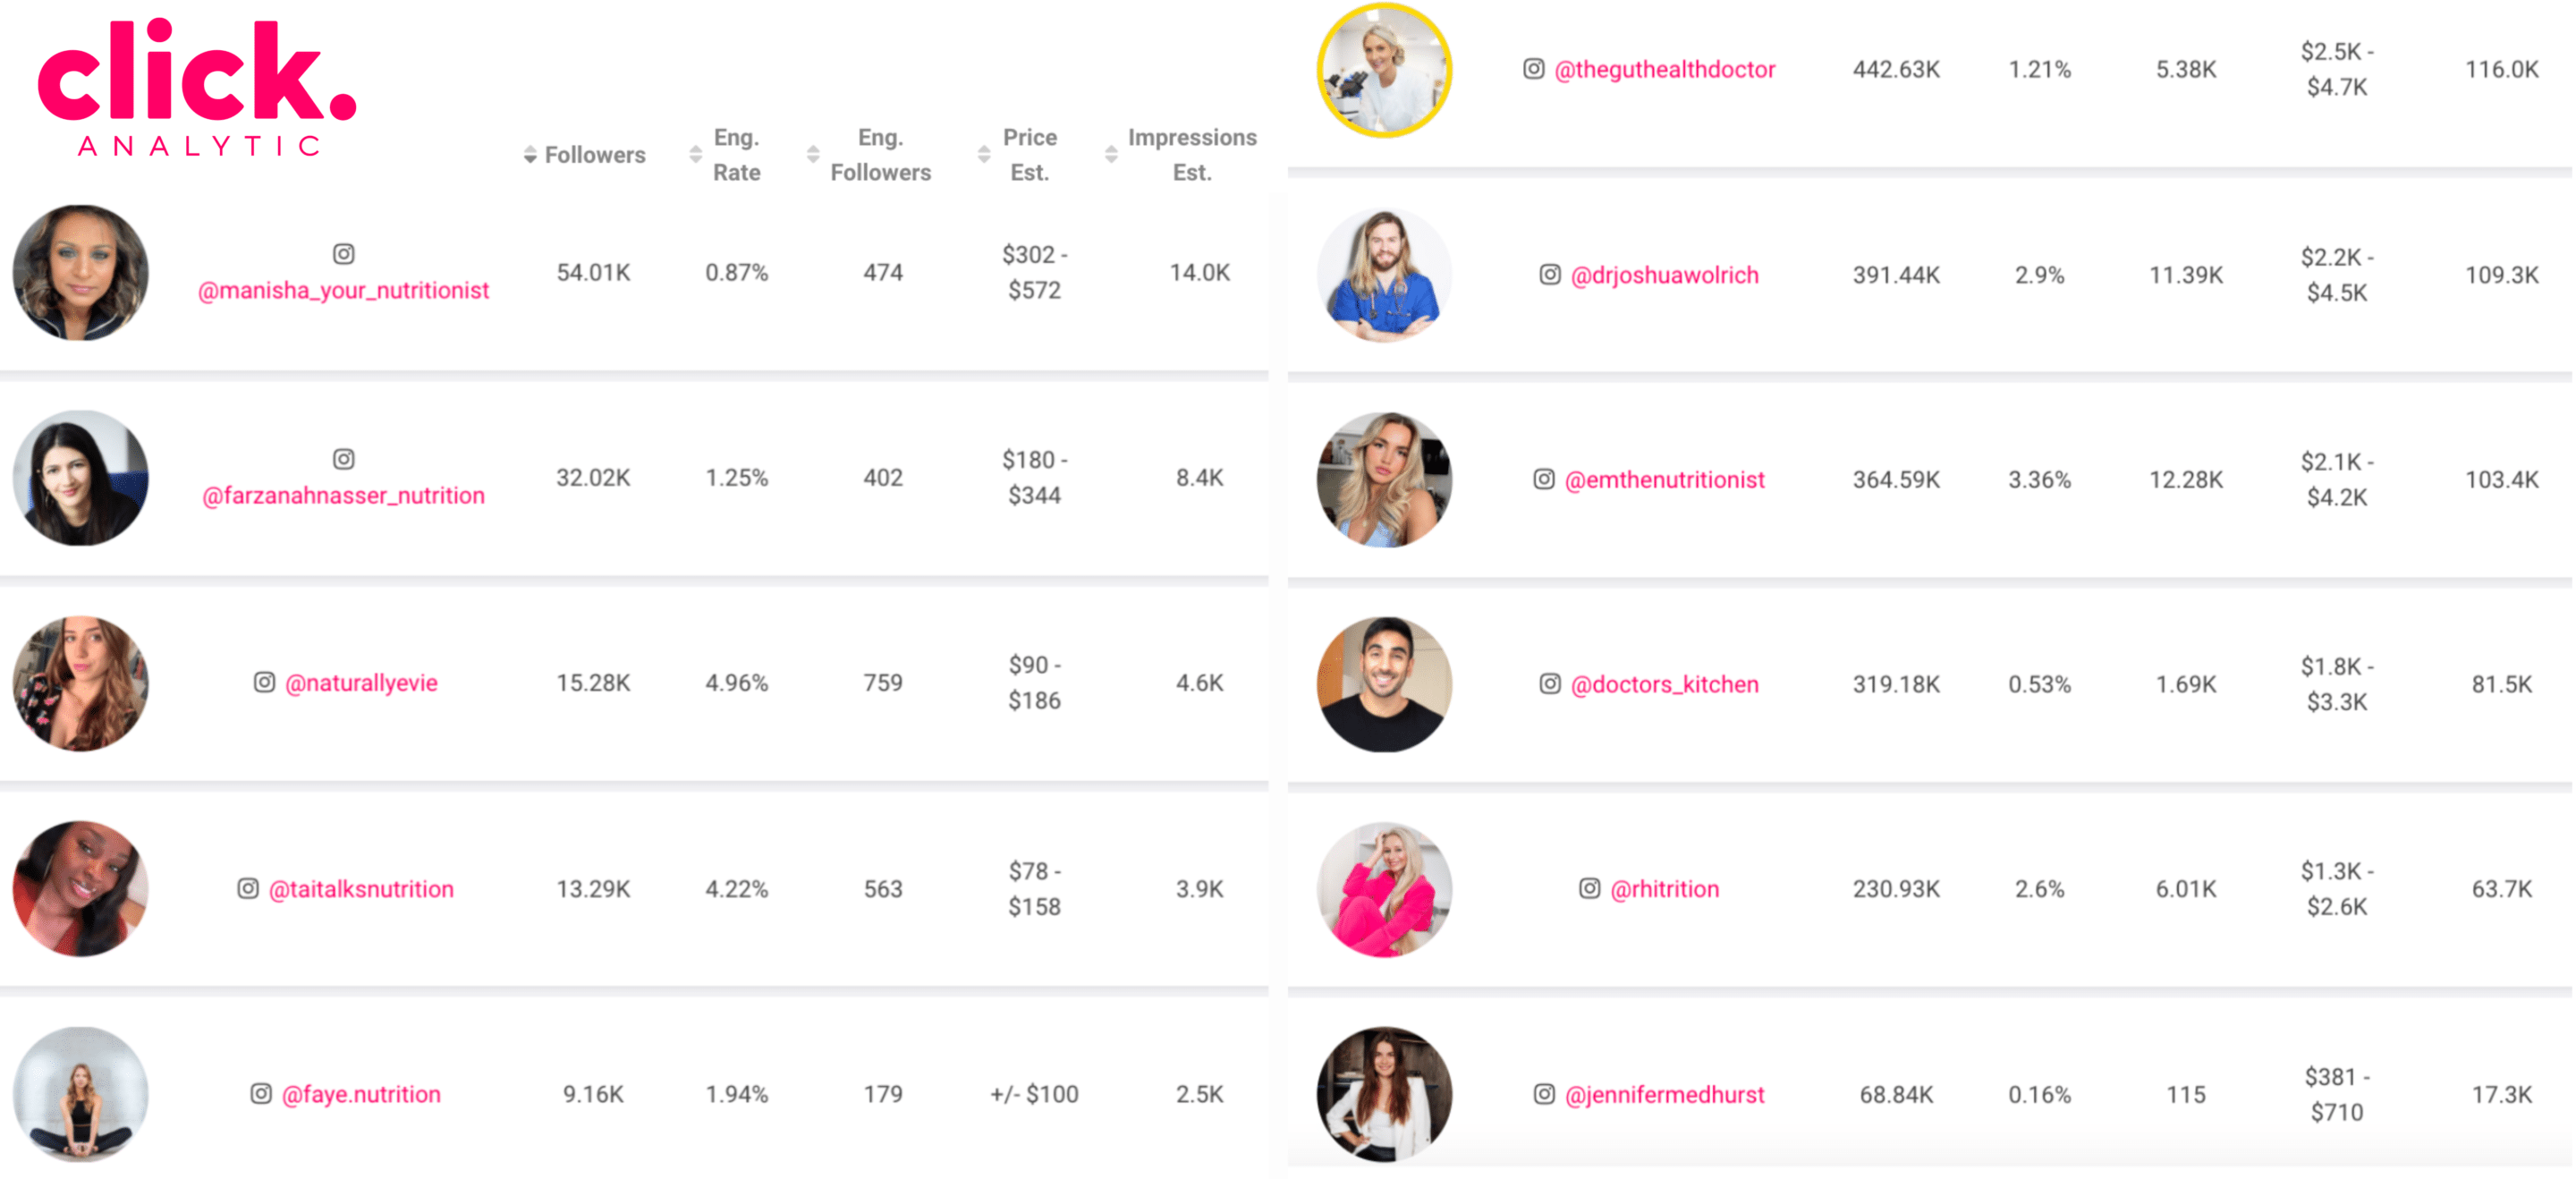 Social media content creator List on Click - the Top 11 Nutrition Influencers in the UK